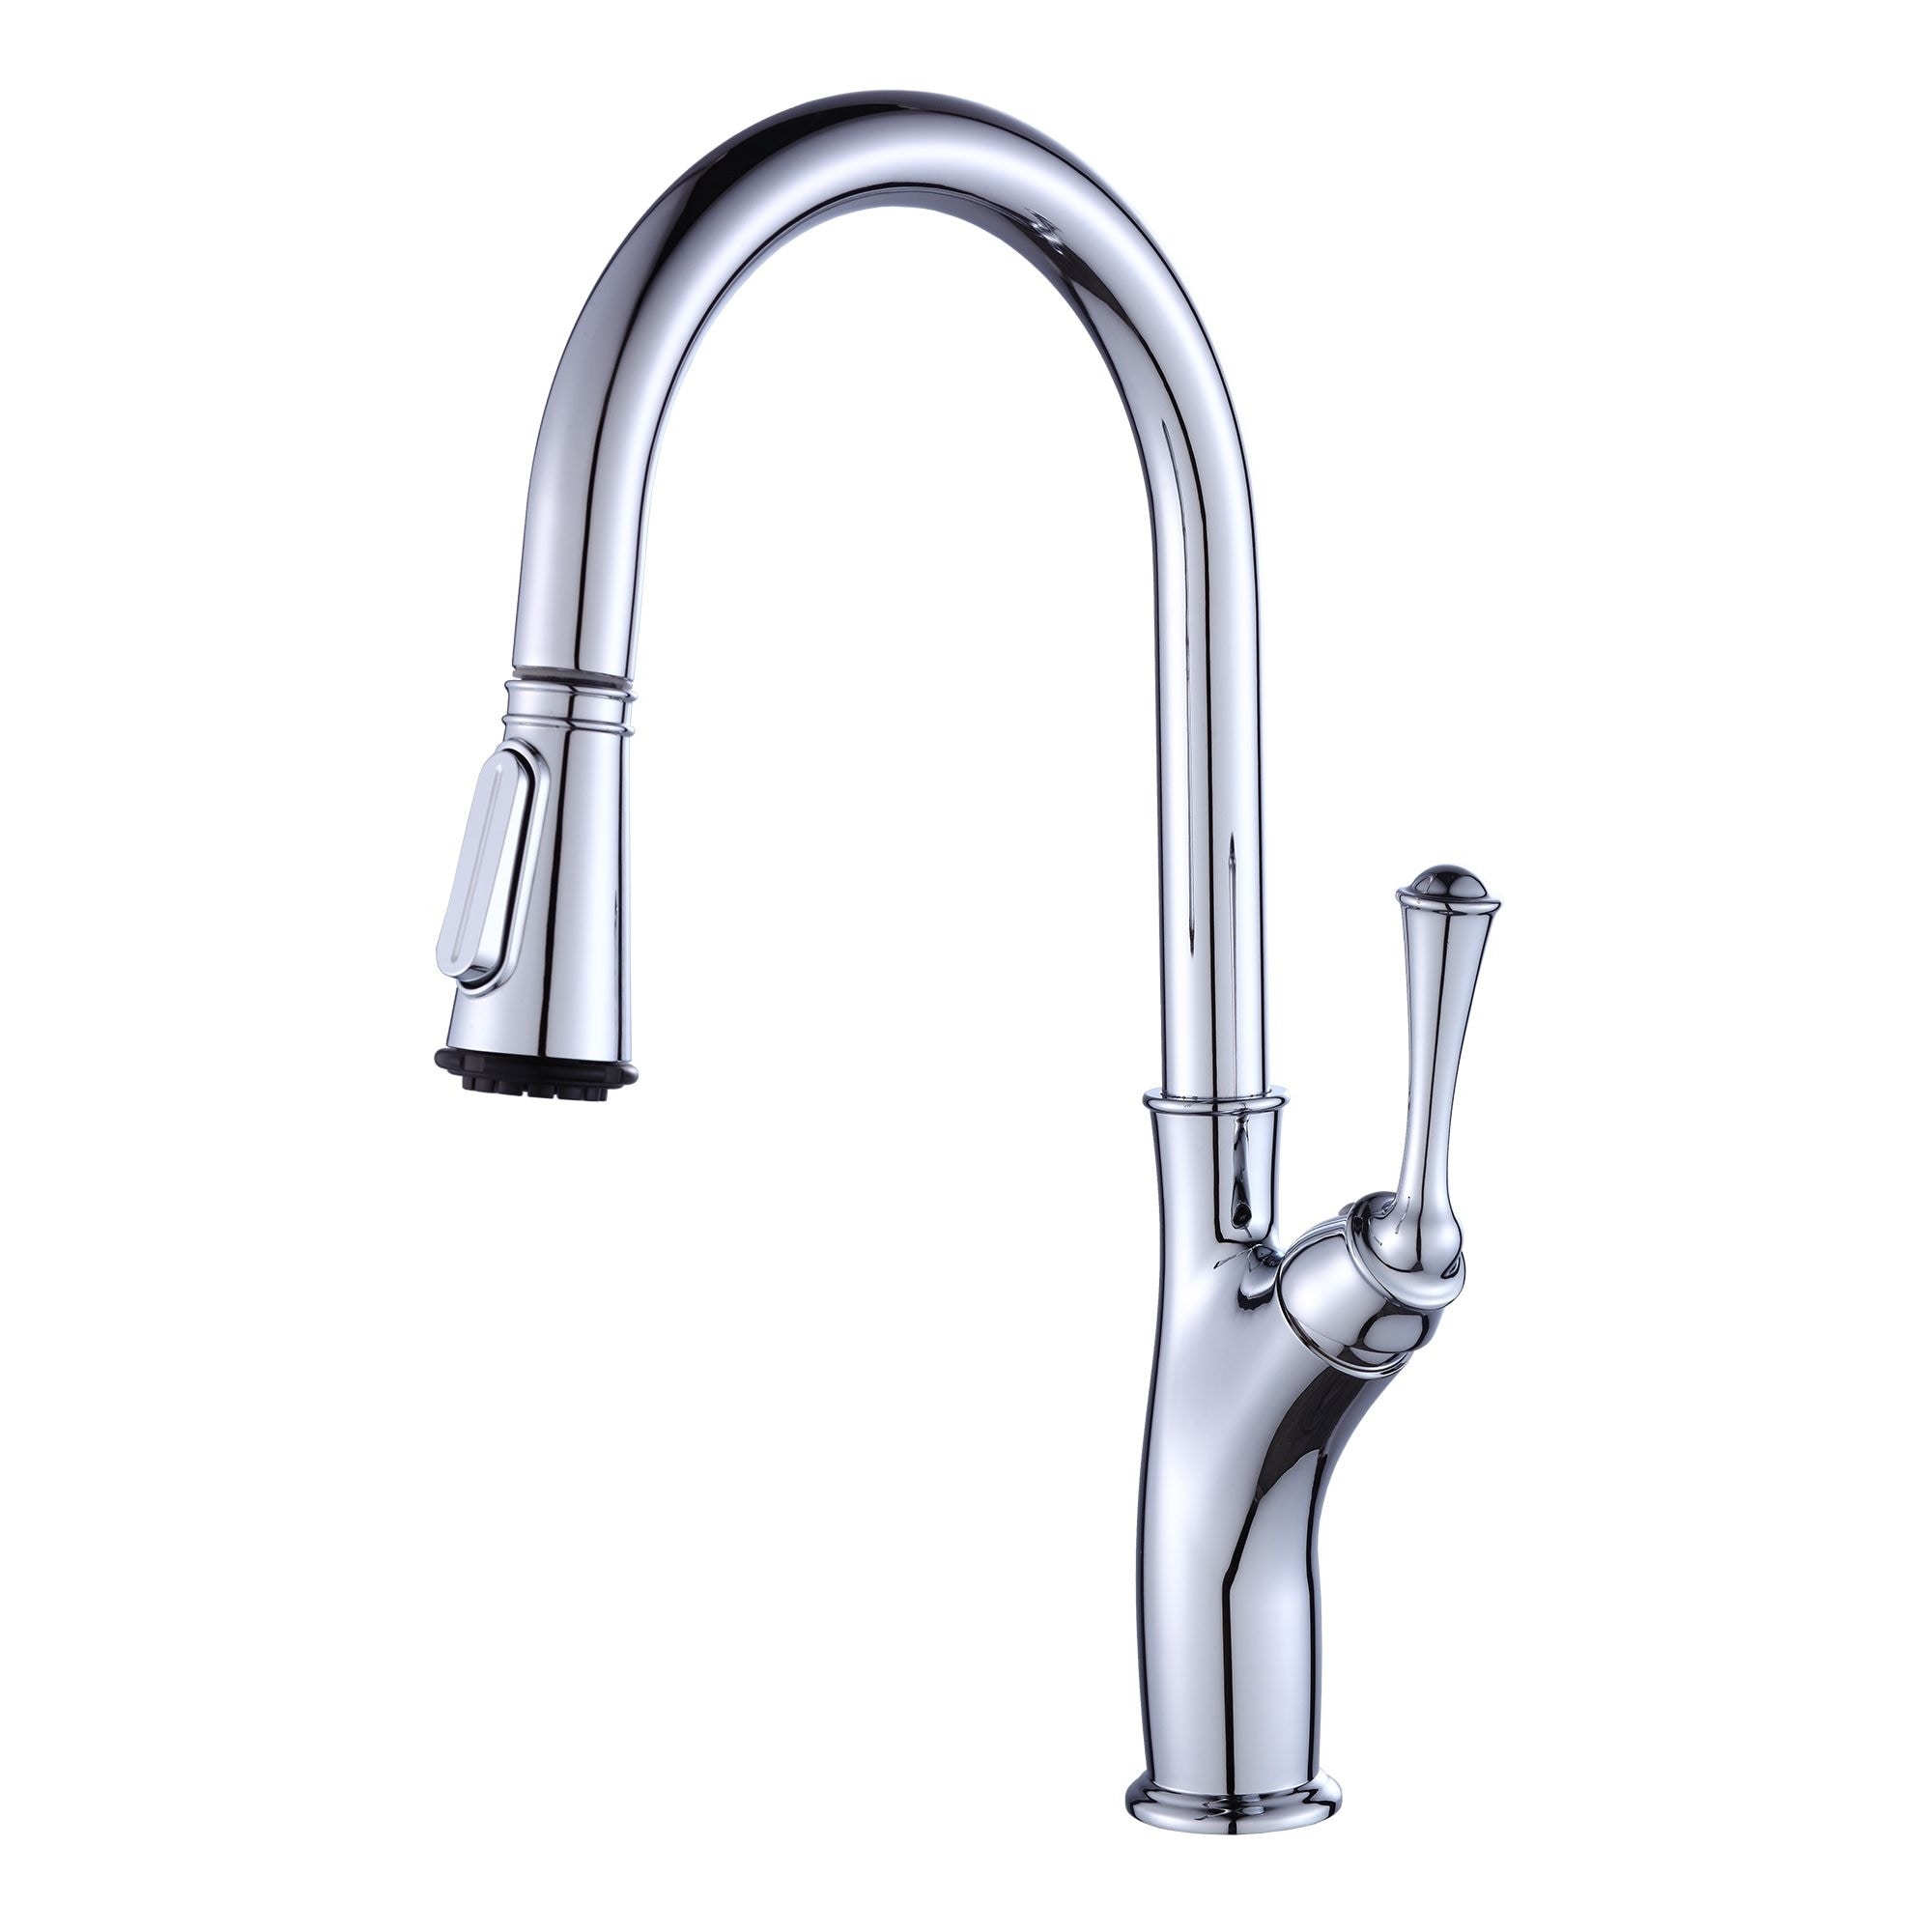 Washing Basin Kitchen SLT0213 Pull Type Faucet Pull Faucetquality Assurance of Modern Simple Luxury Stainless Steel Washbasin Luxury and Ancient Class H Faucet Hot and Cold Washbasin Pan Basin 